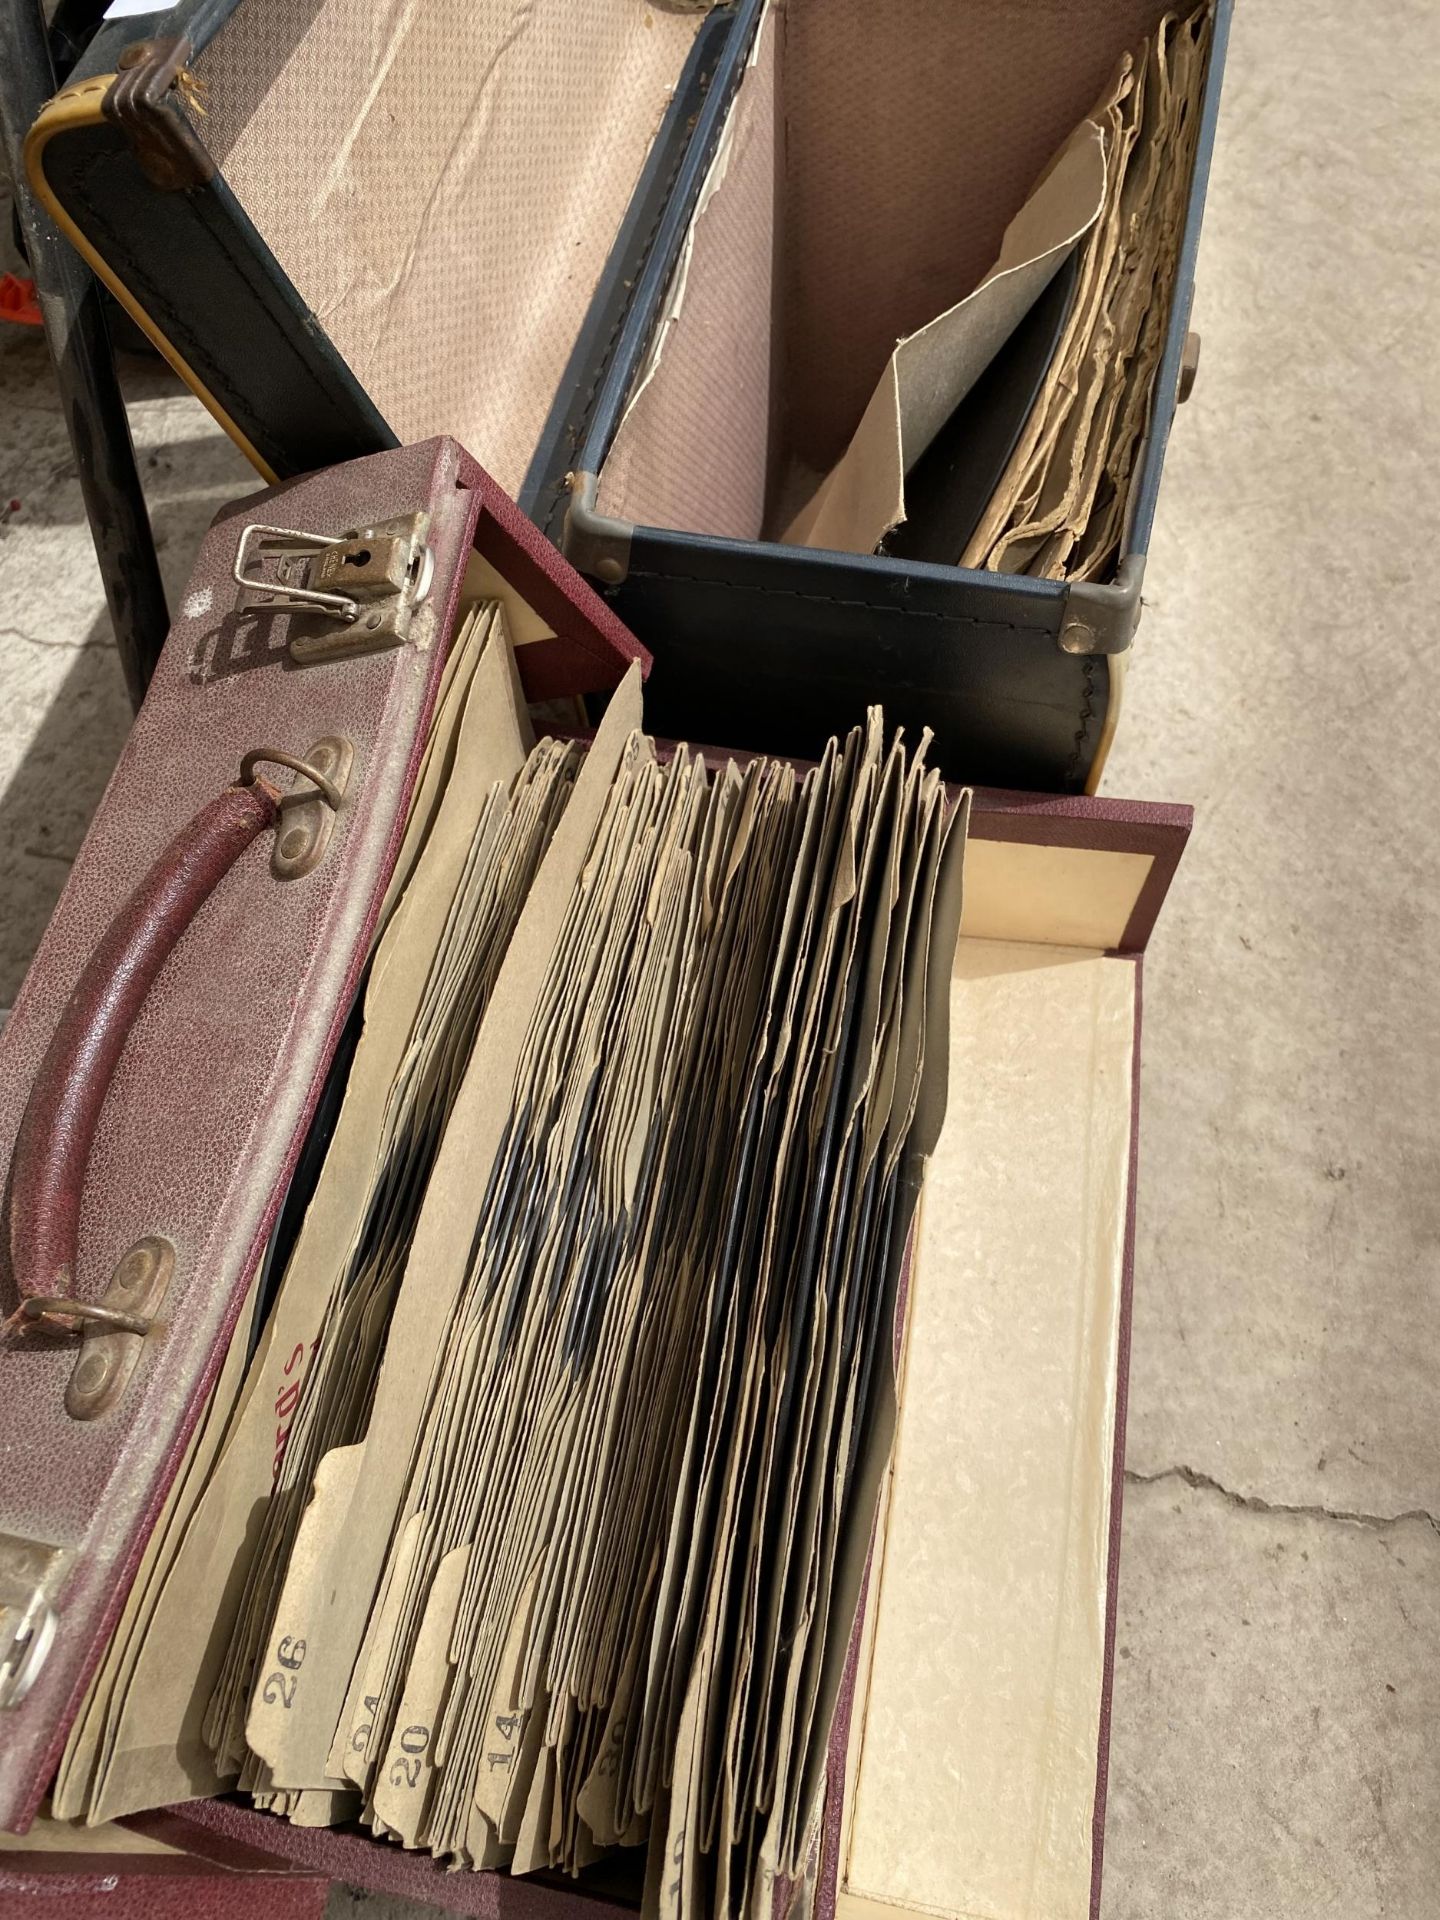 TWO VINYL RECORD CARRY CASES AND 78' RECORDS - Image 2 of 3